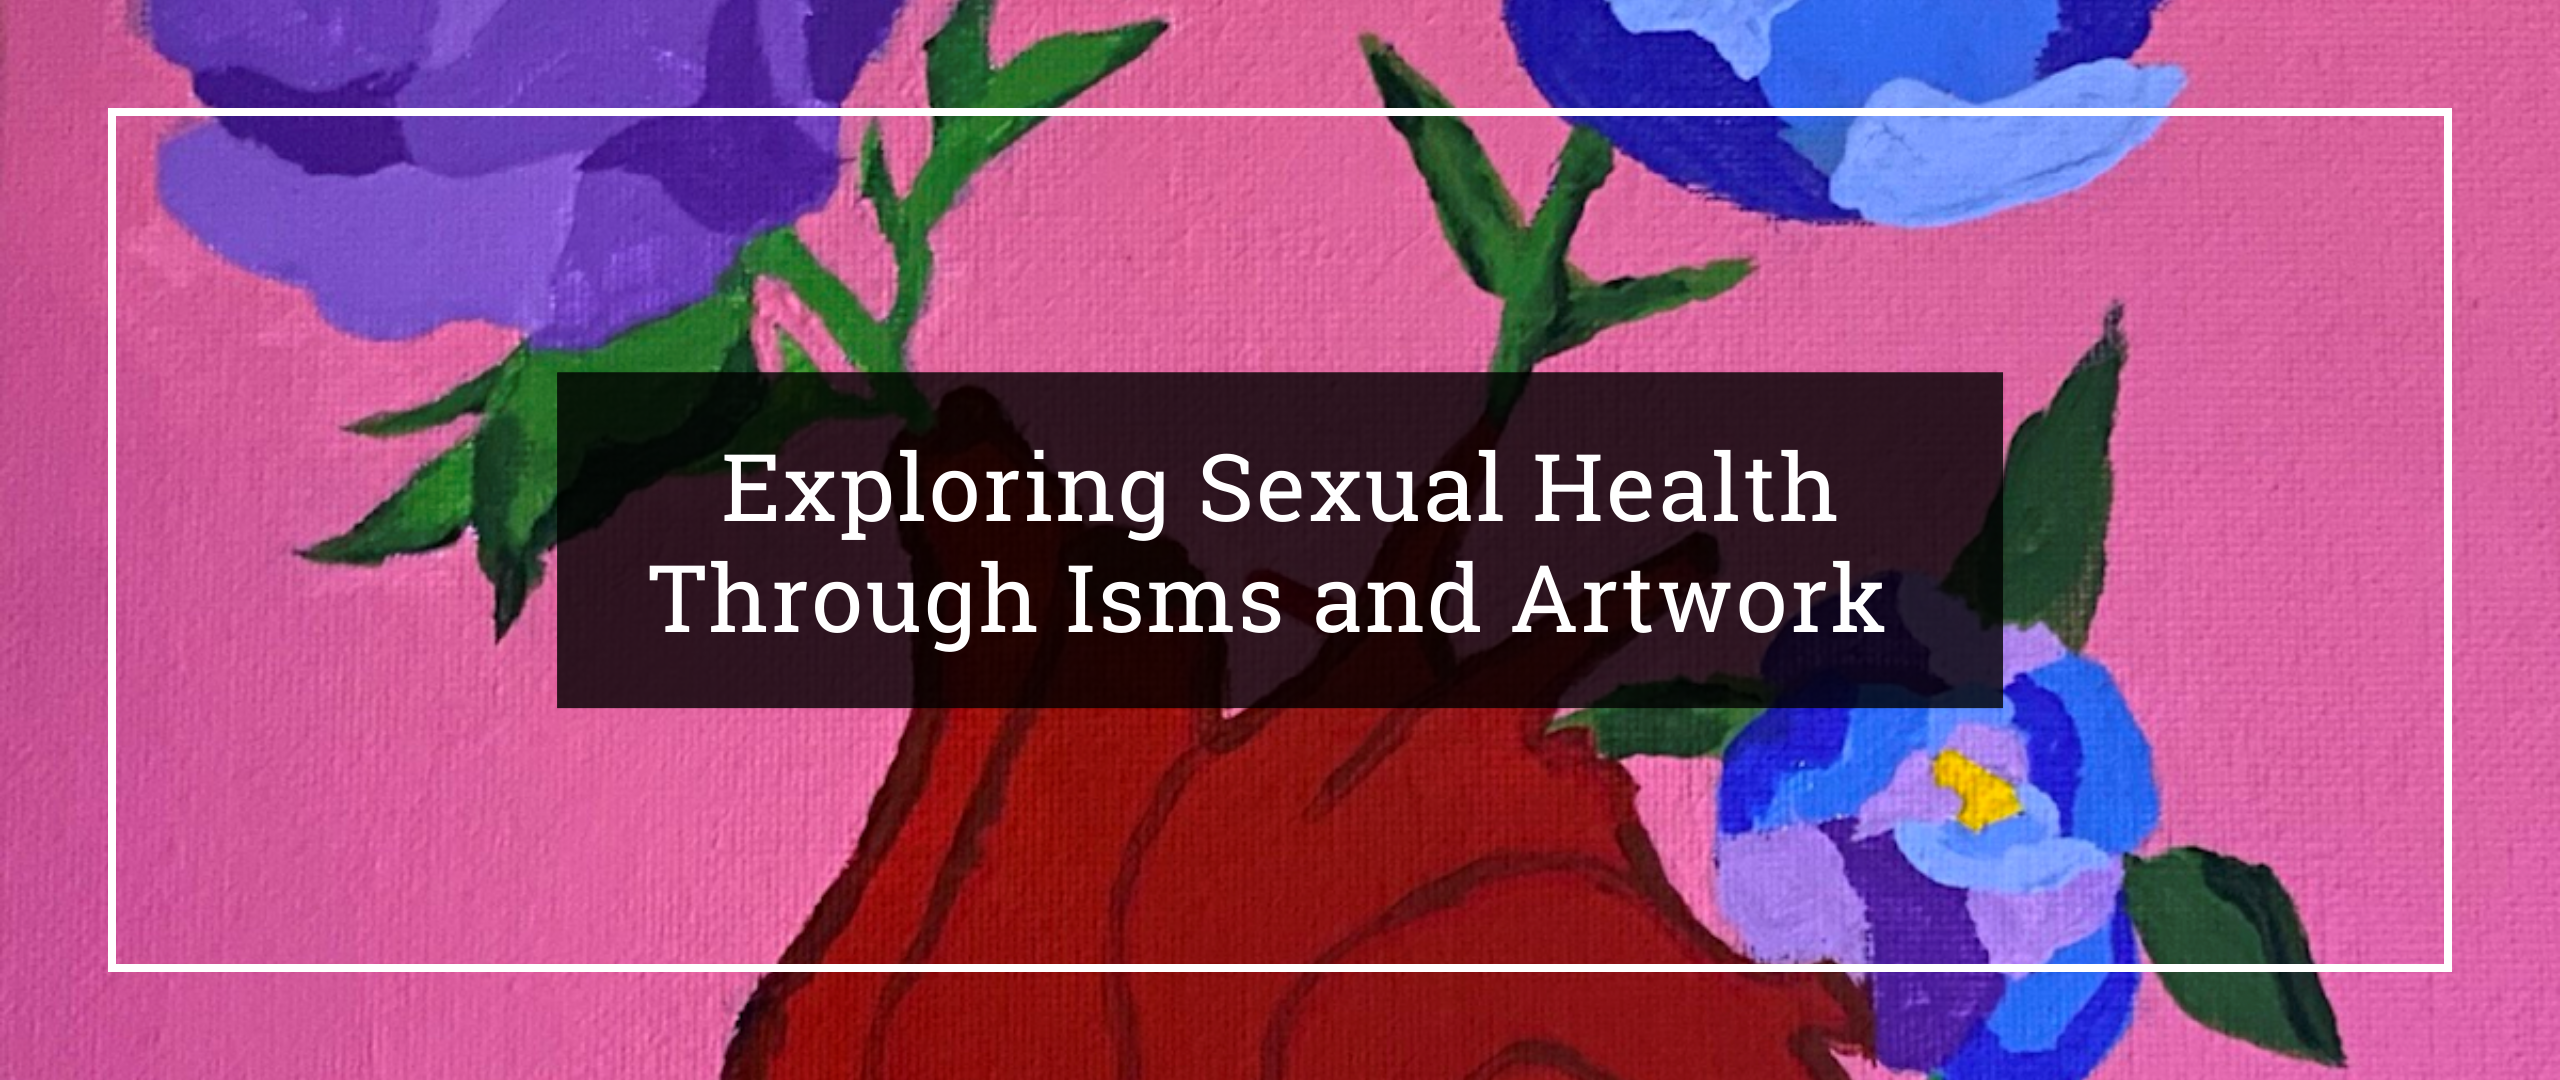 Exploring Sexual Health through Isms and Artwork